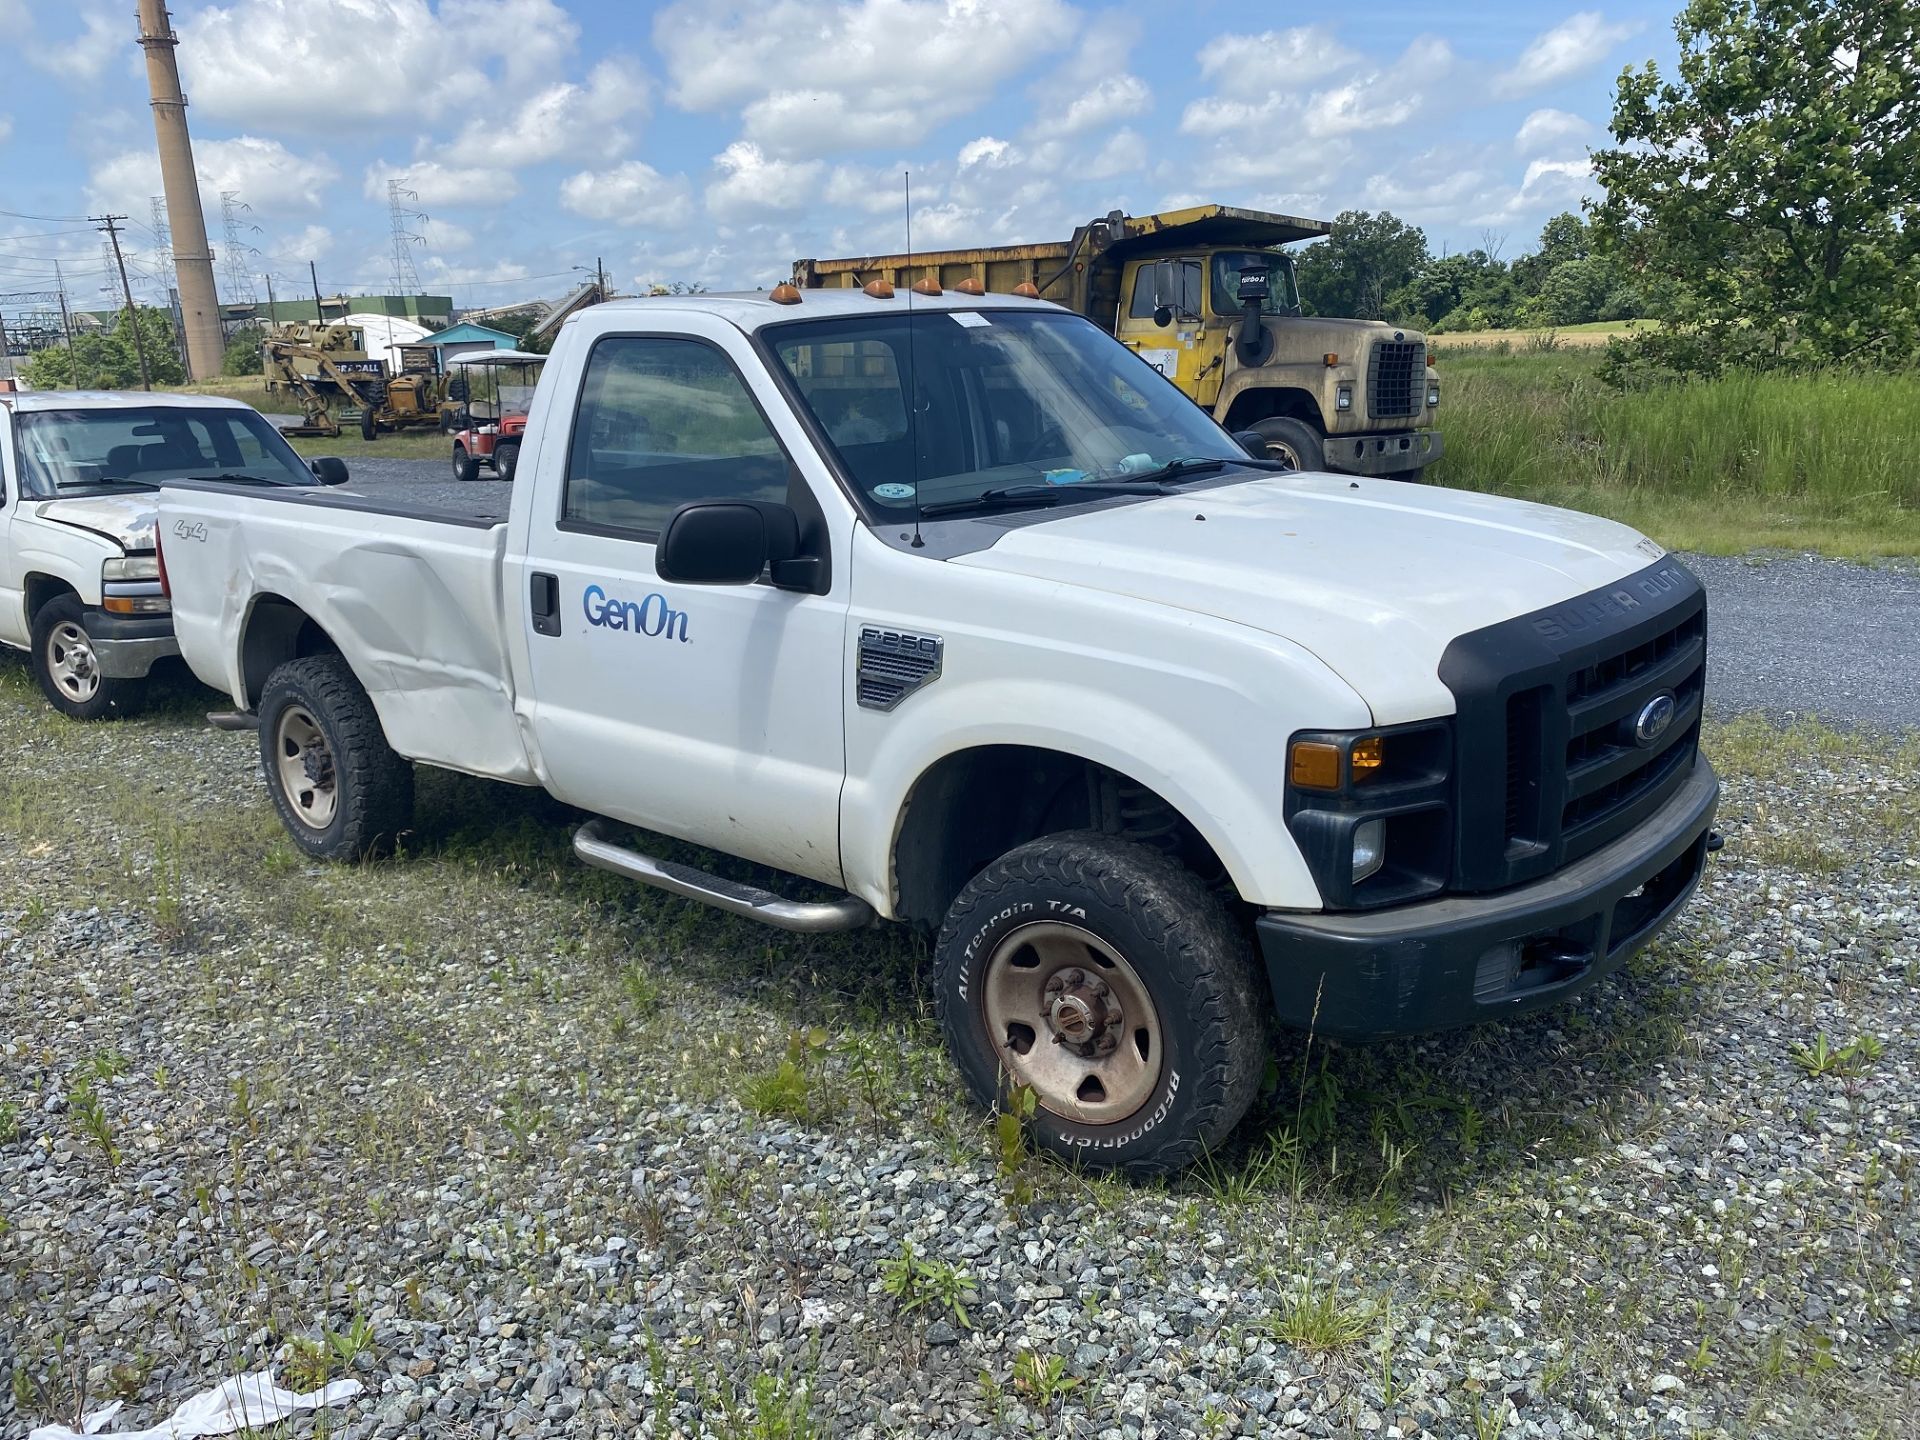 2008 FORD F250 XL 4X4, 65,400 MILES, VIN: 1FTNF21538ED85966, W/ TITLE (LOCATION: CY ROAD) - Image 2 of 2